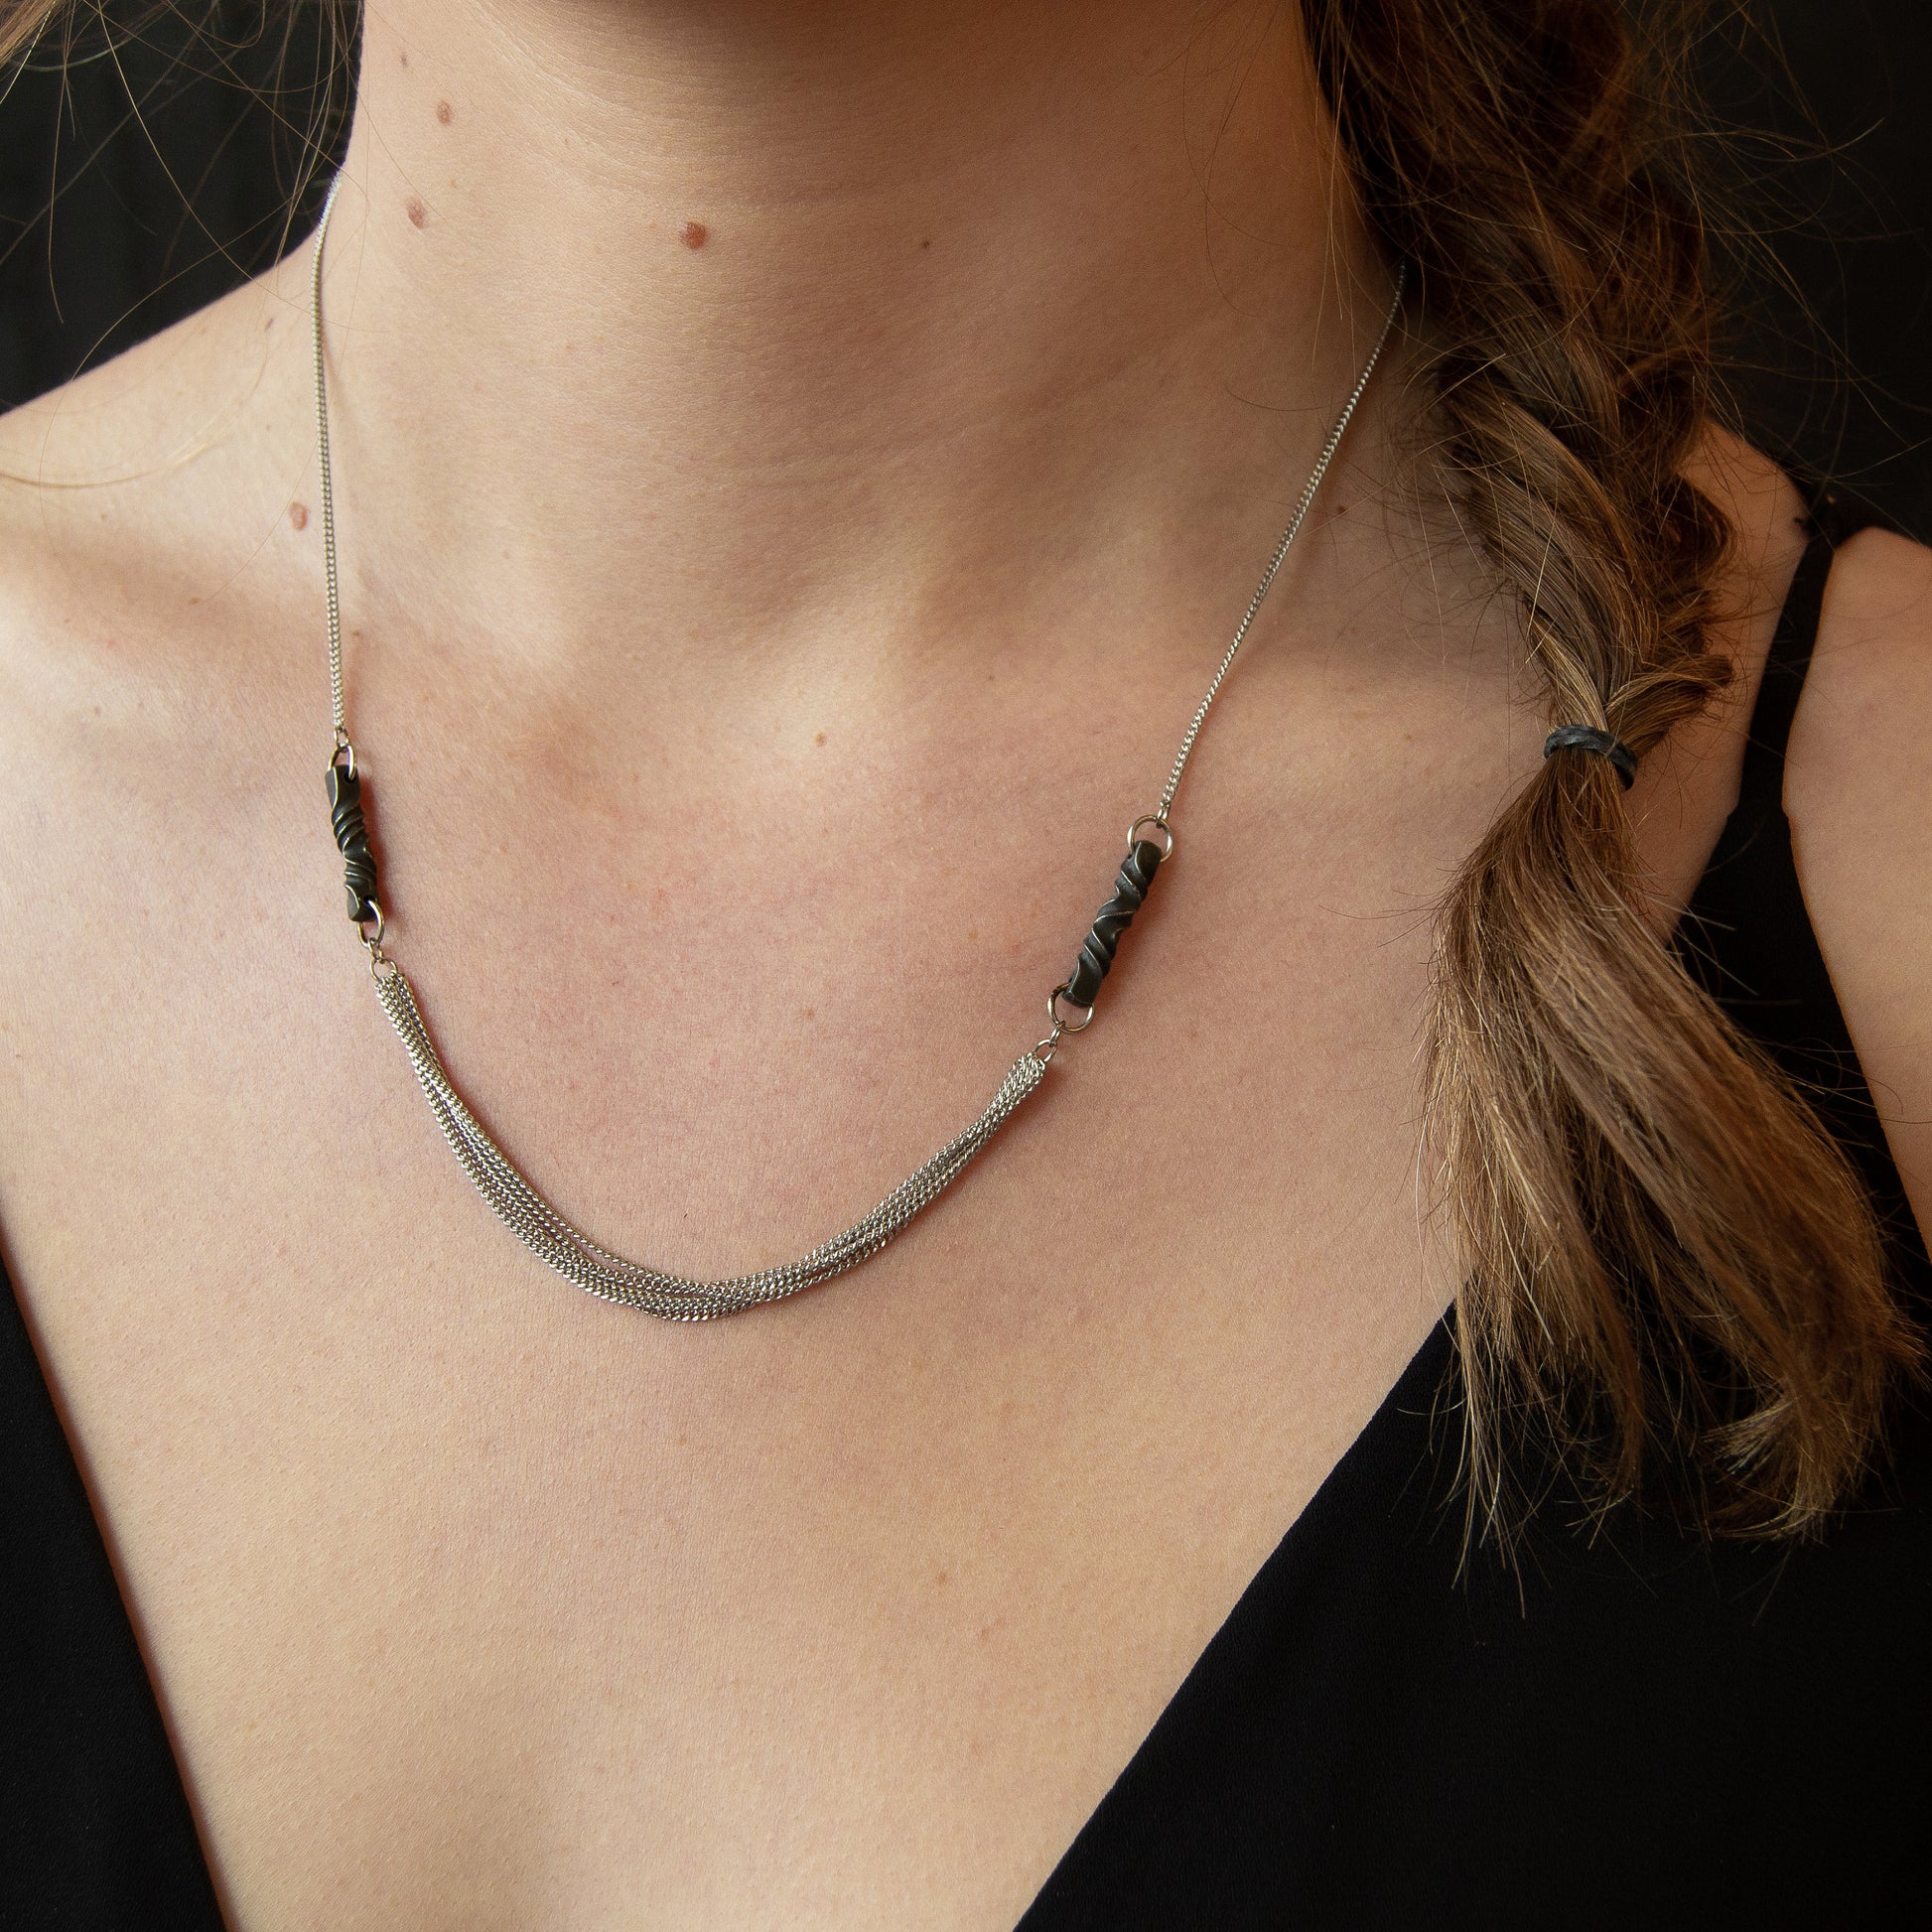 11th anniversary gift for wife- handmade modern steel necklace -stainless steel- iron necklace-architectural necklace -choker length-